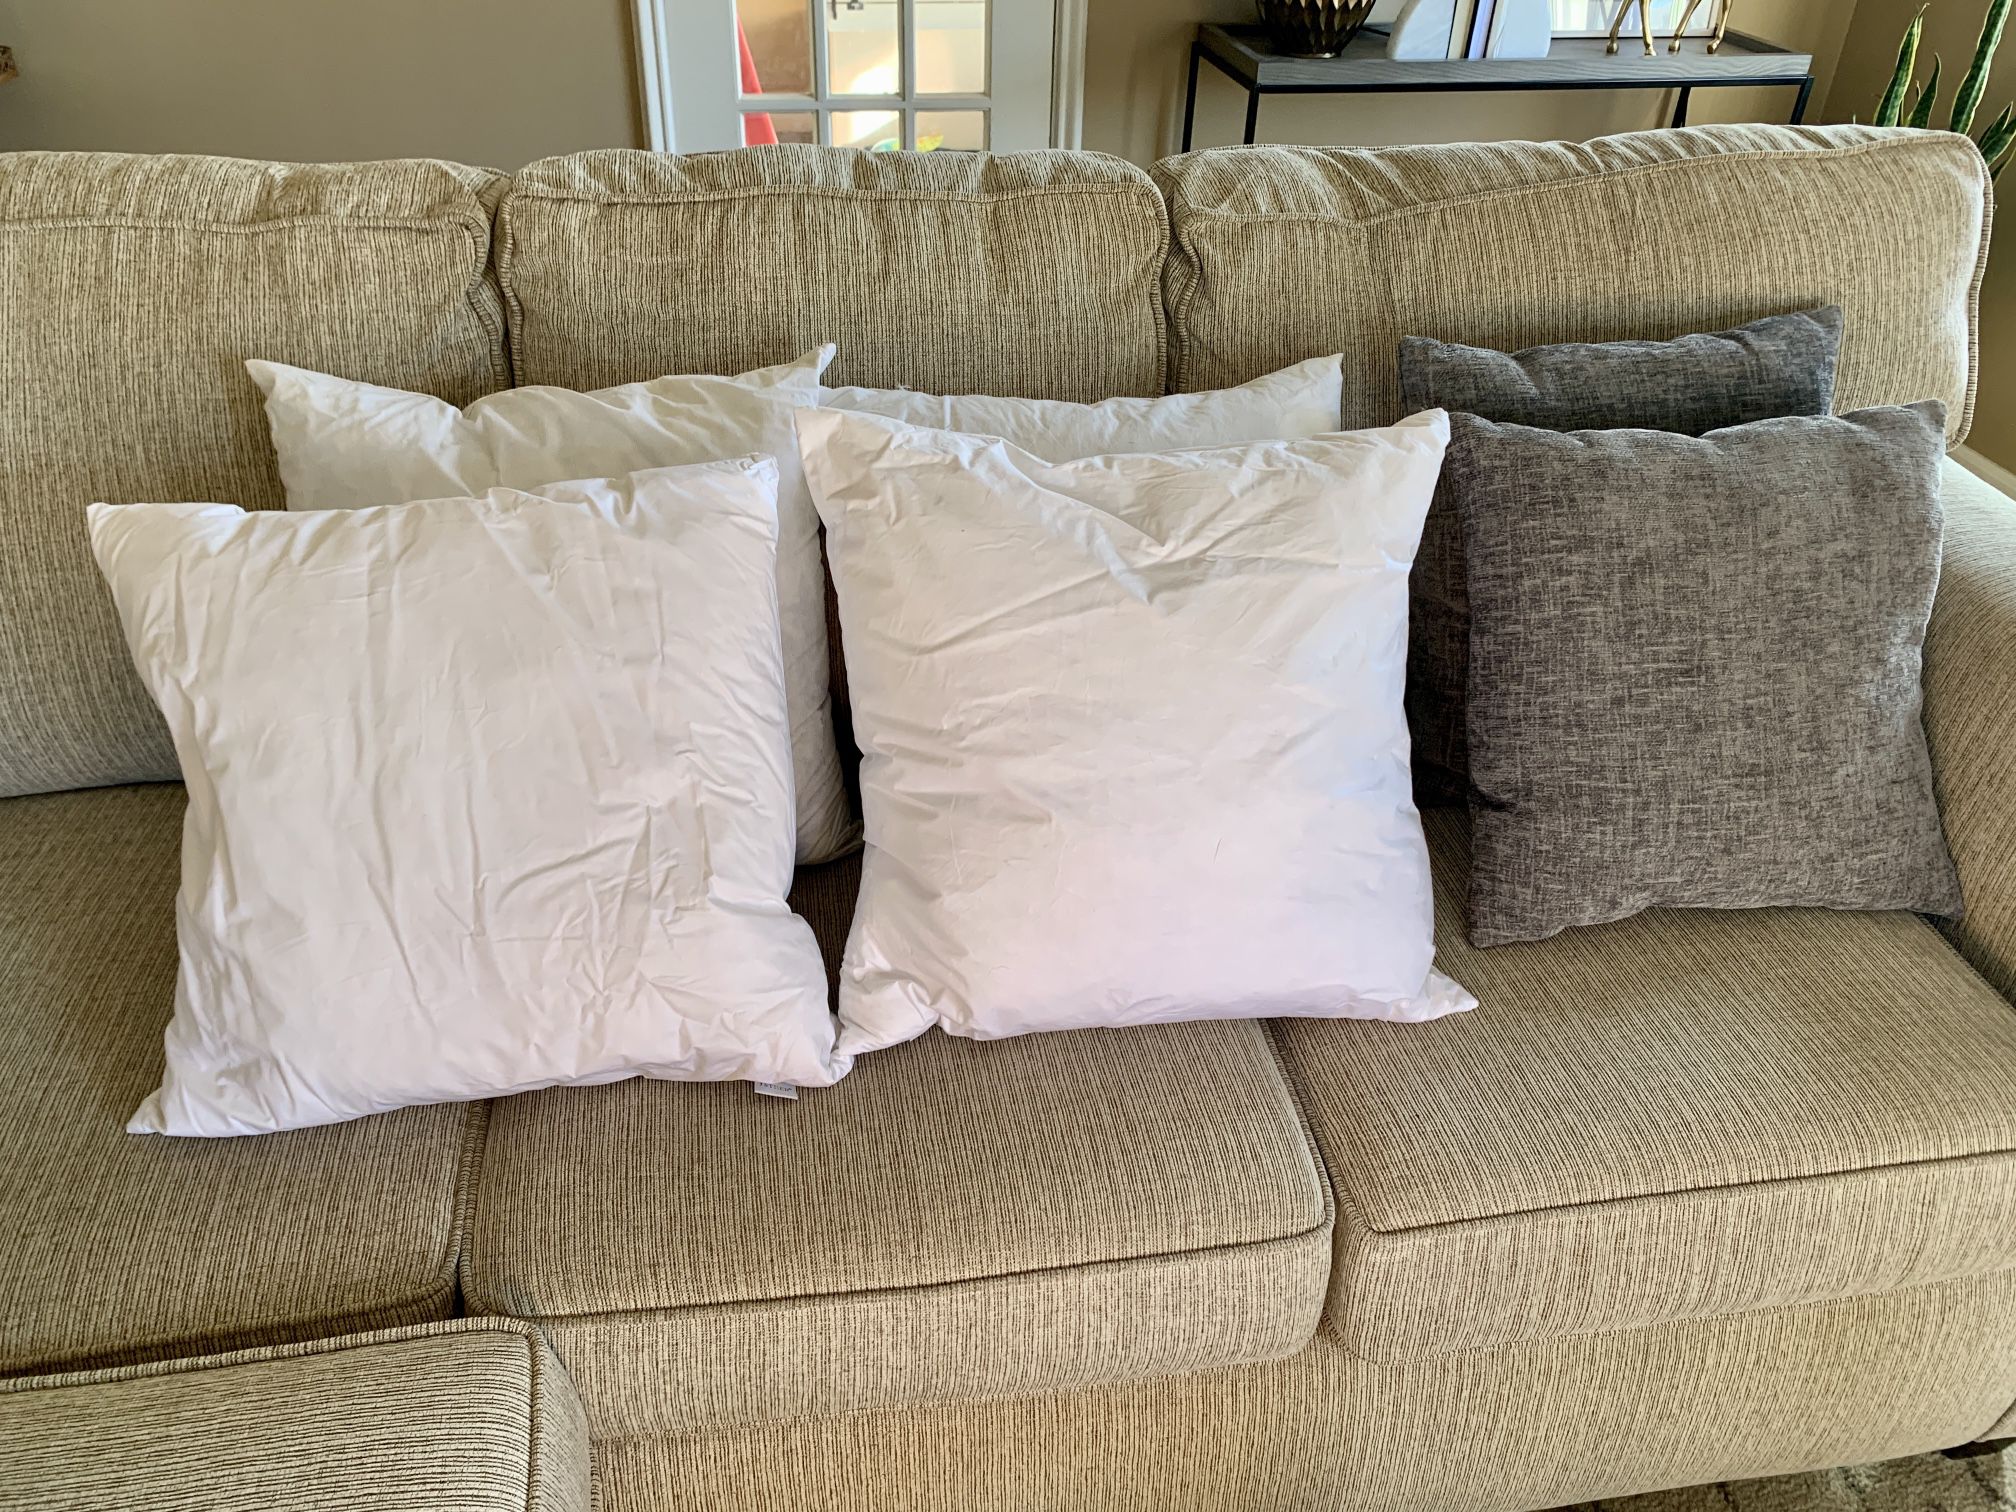 Pillow Inserts and Pillows